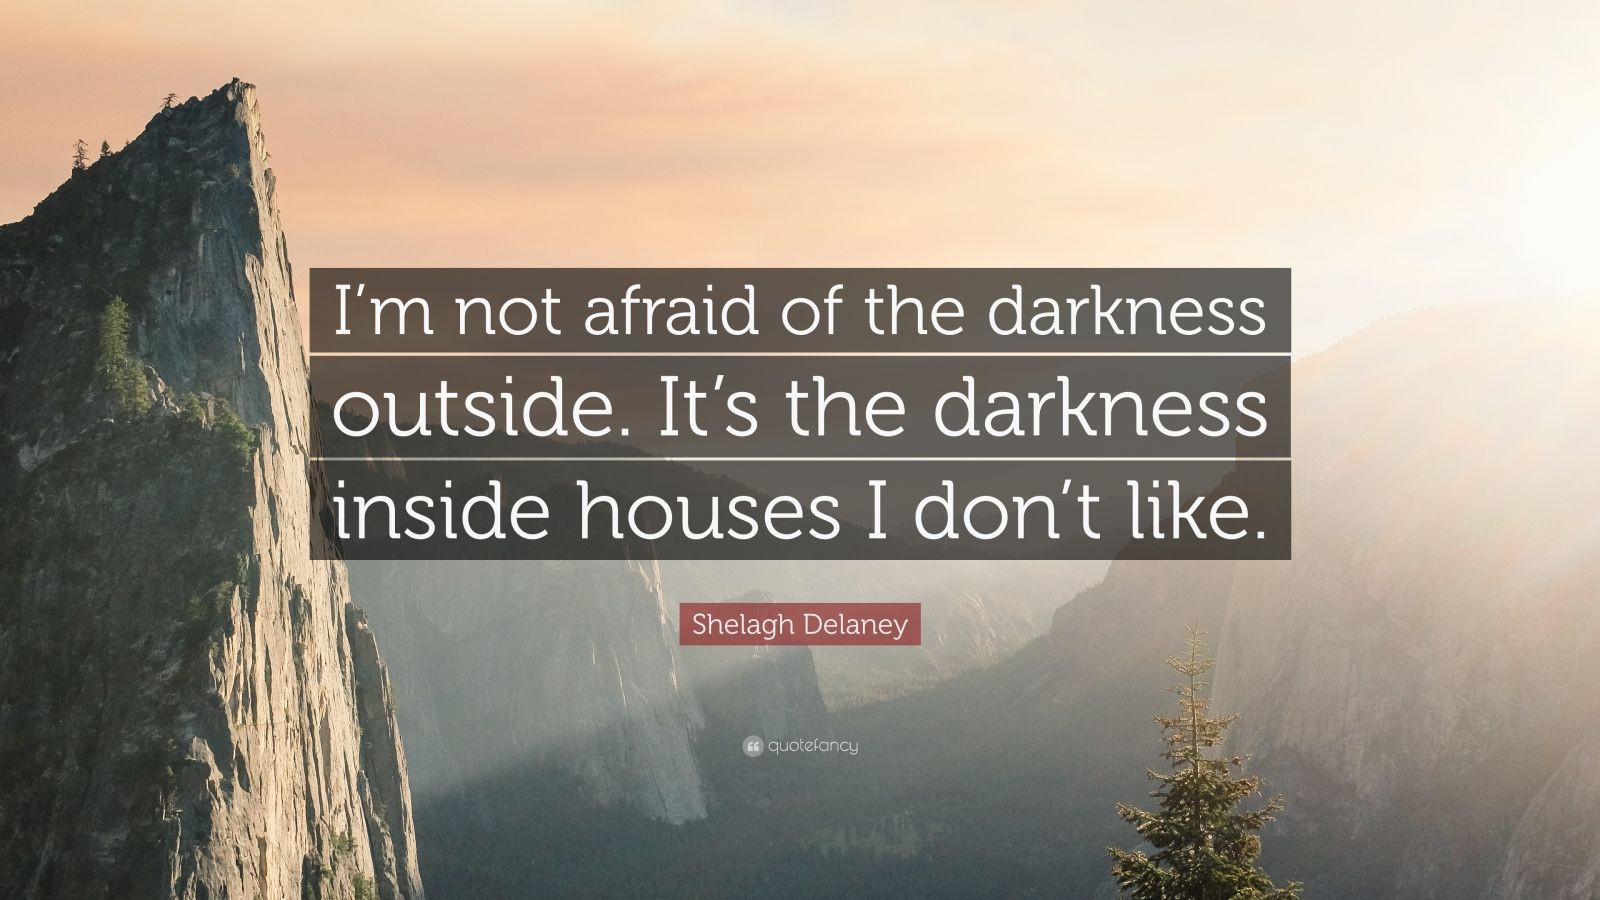 Shelagh Delaney Quote: “I’m not afraid of the darkness outside. It’s ...